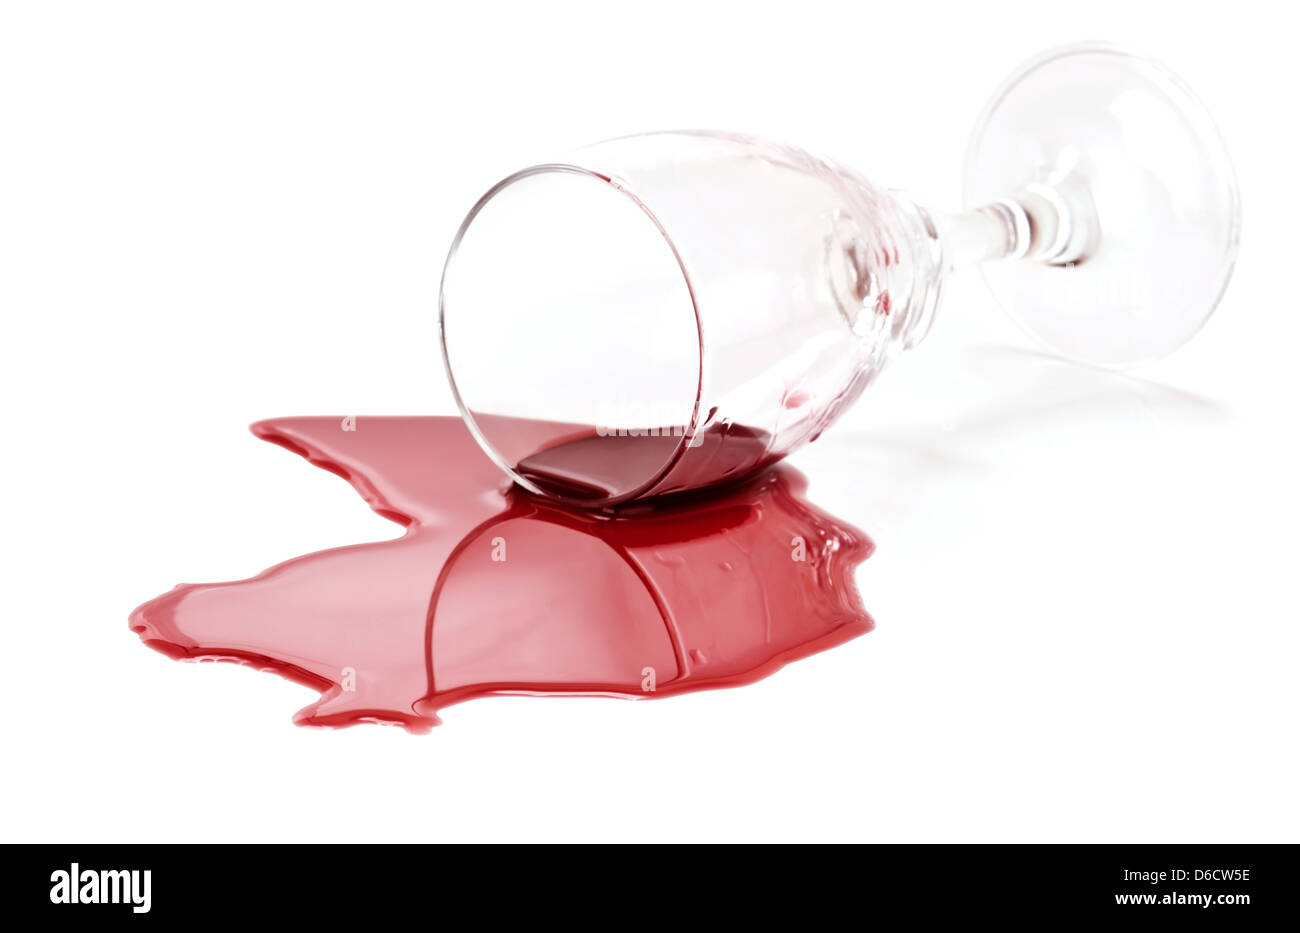 Spilled red wine glass Stock Photo